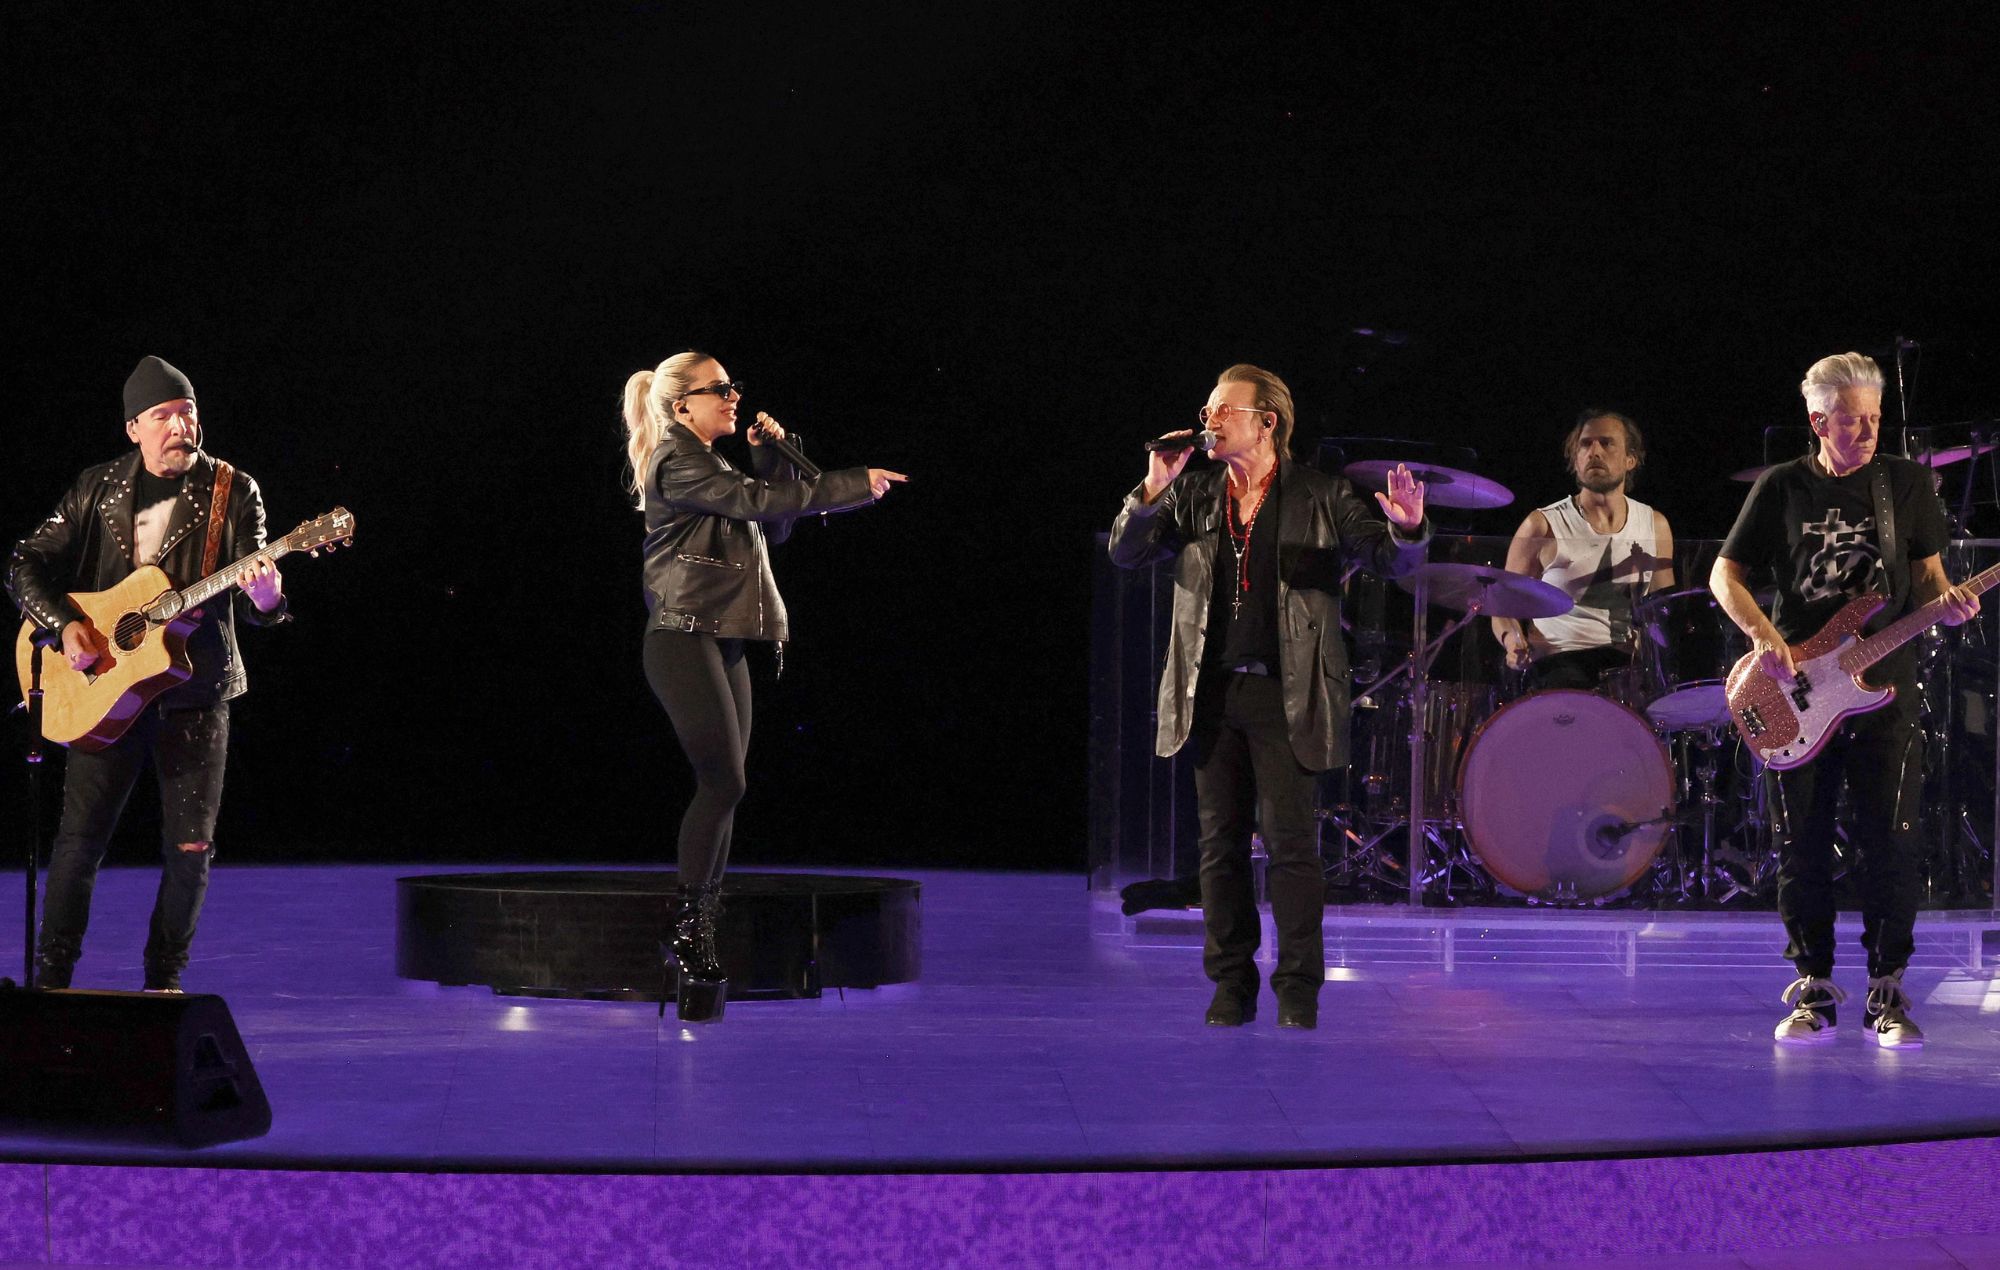 Watch Lady Gaga join U2 for ‘Shallow’ at Las Vegas Sphere